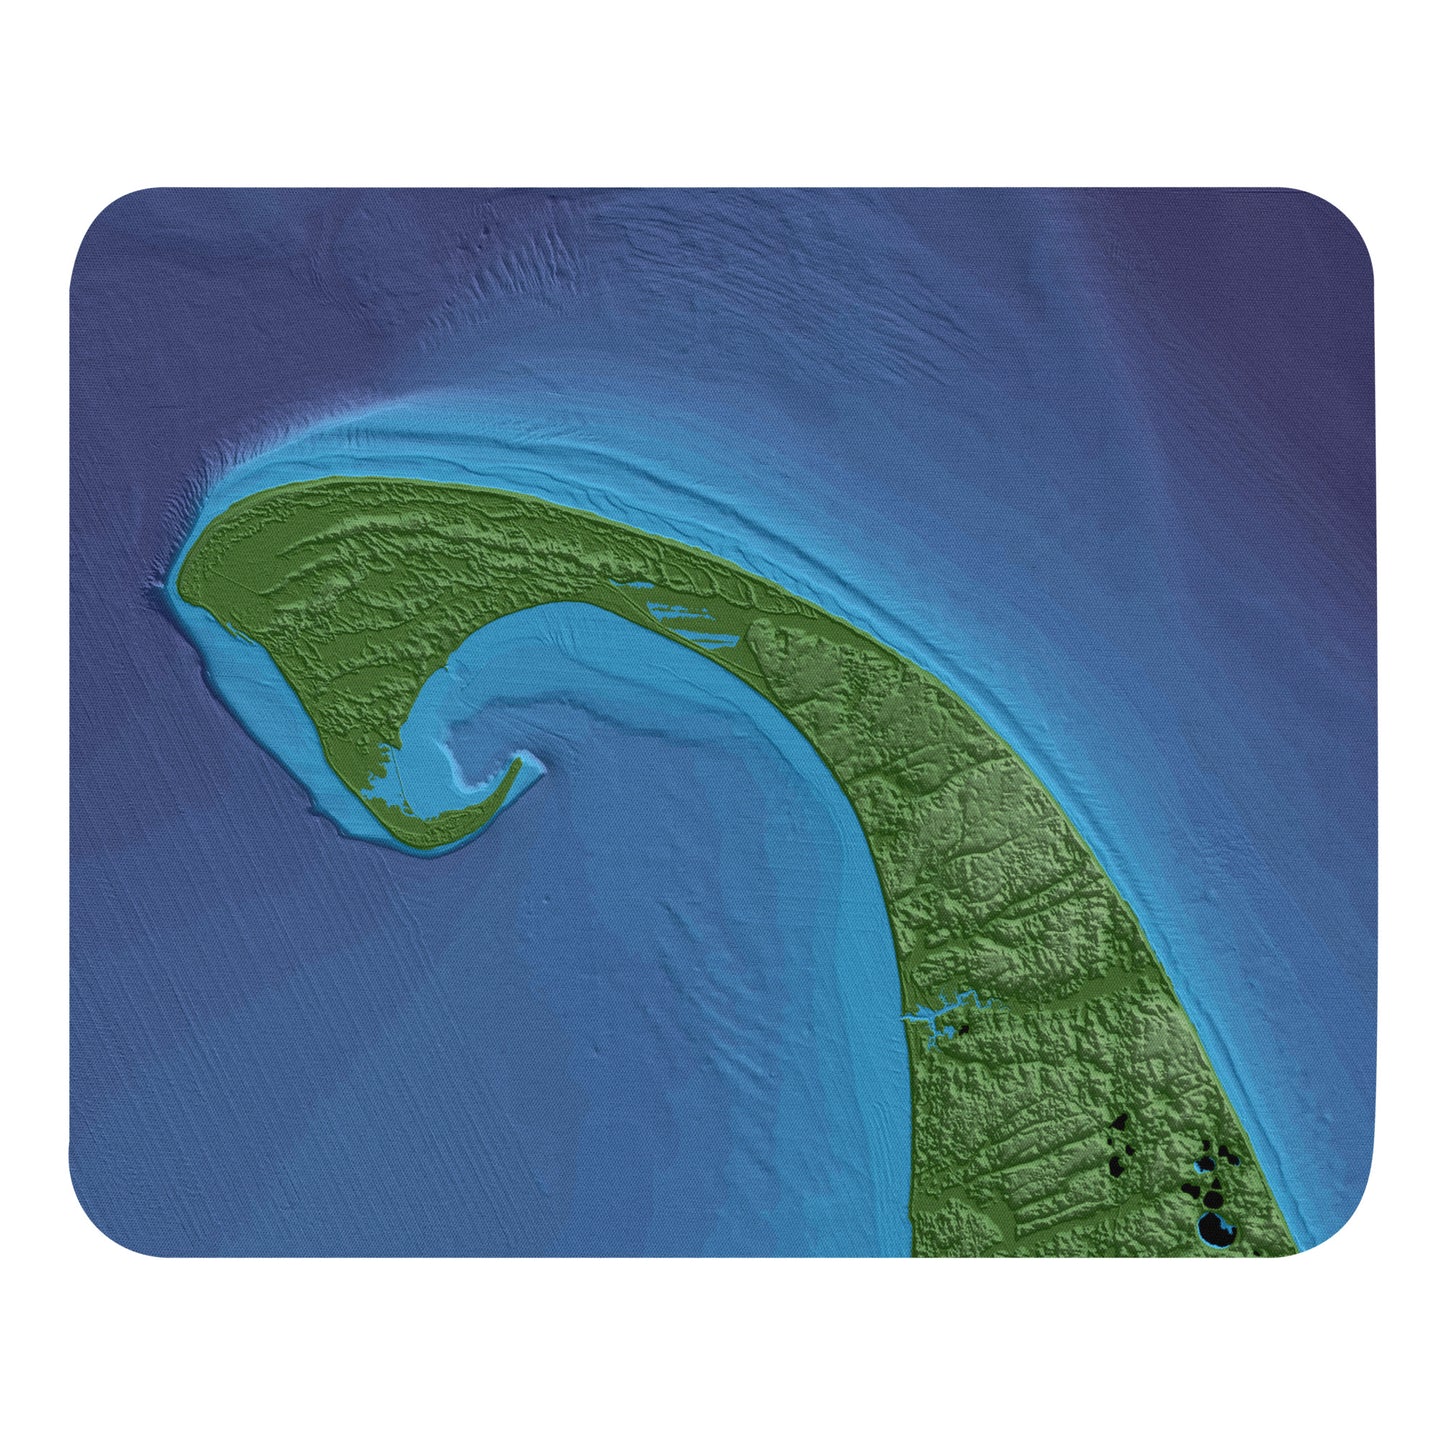 Provincetown mouse pad